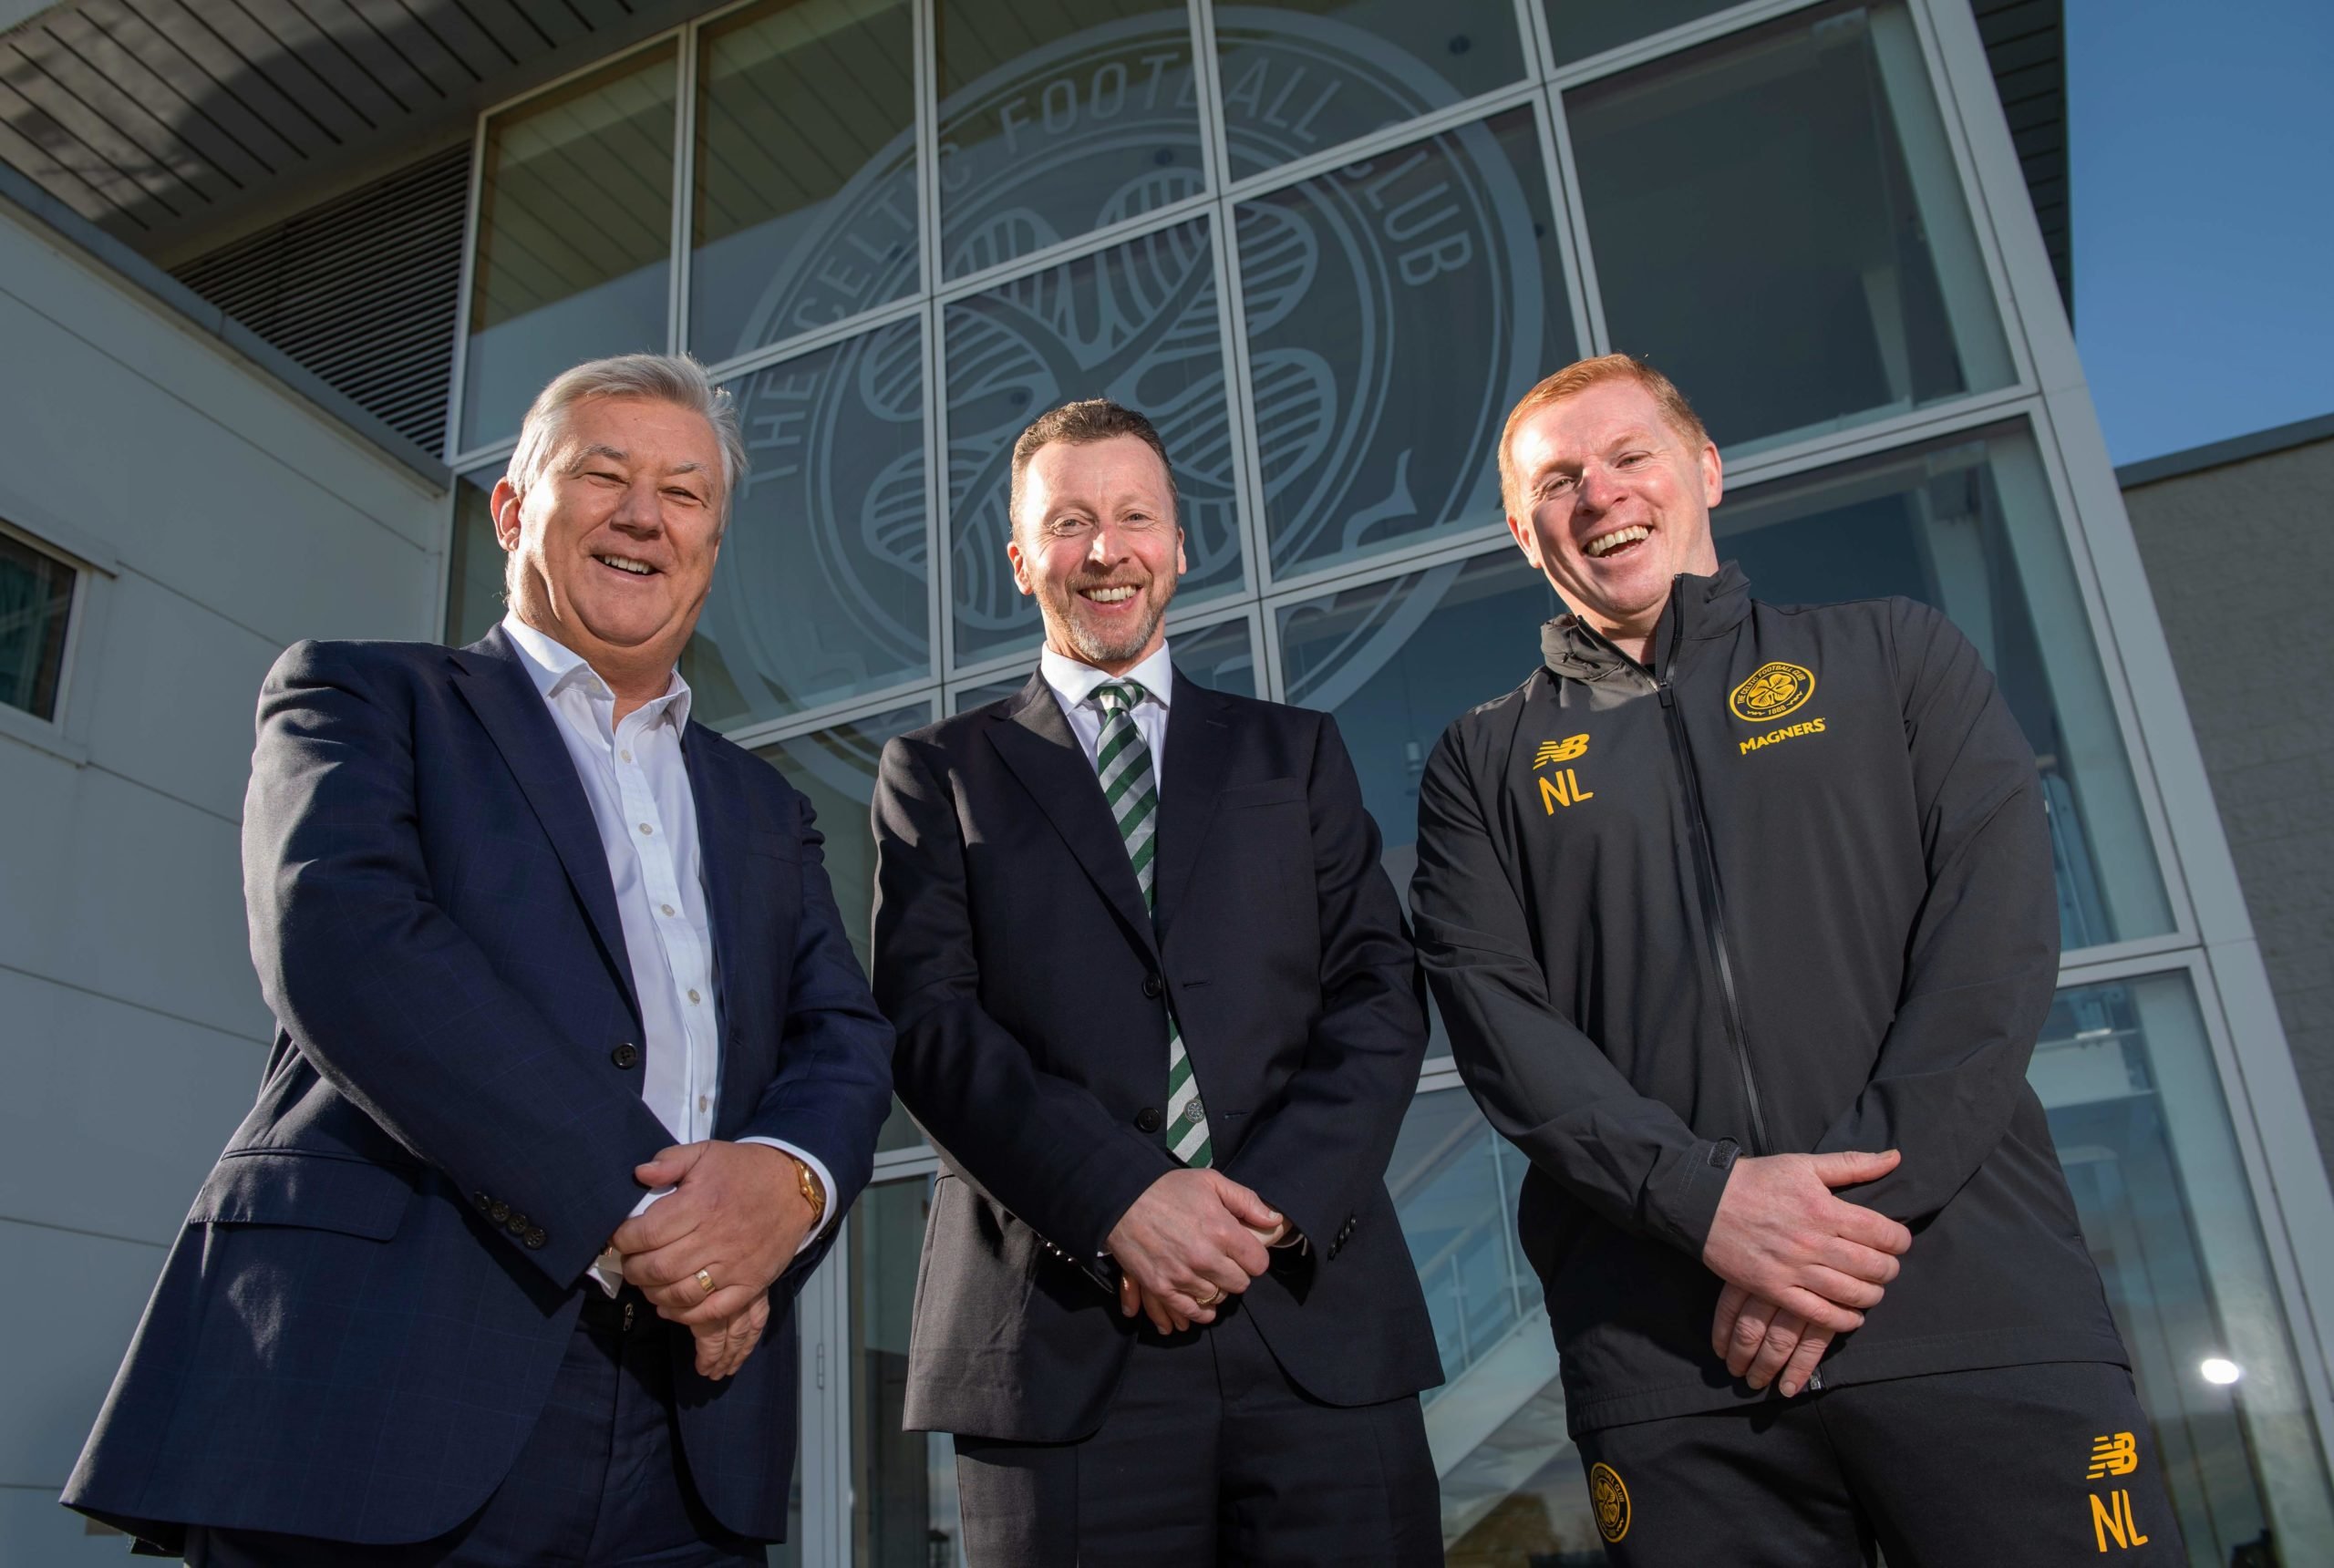 John Kennedy discusses Nick Hammond's scouting department at Celtic